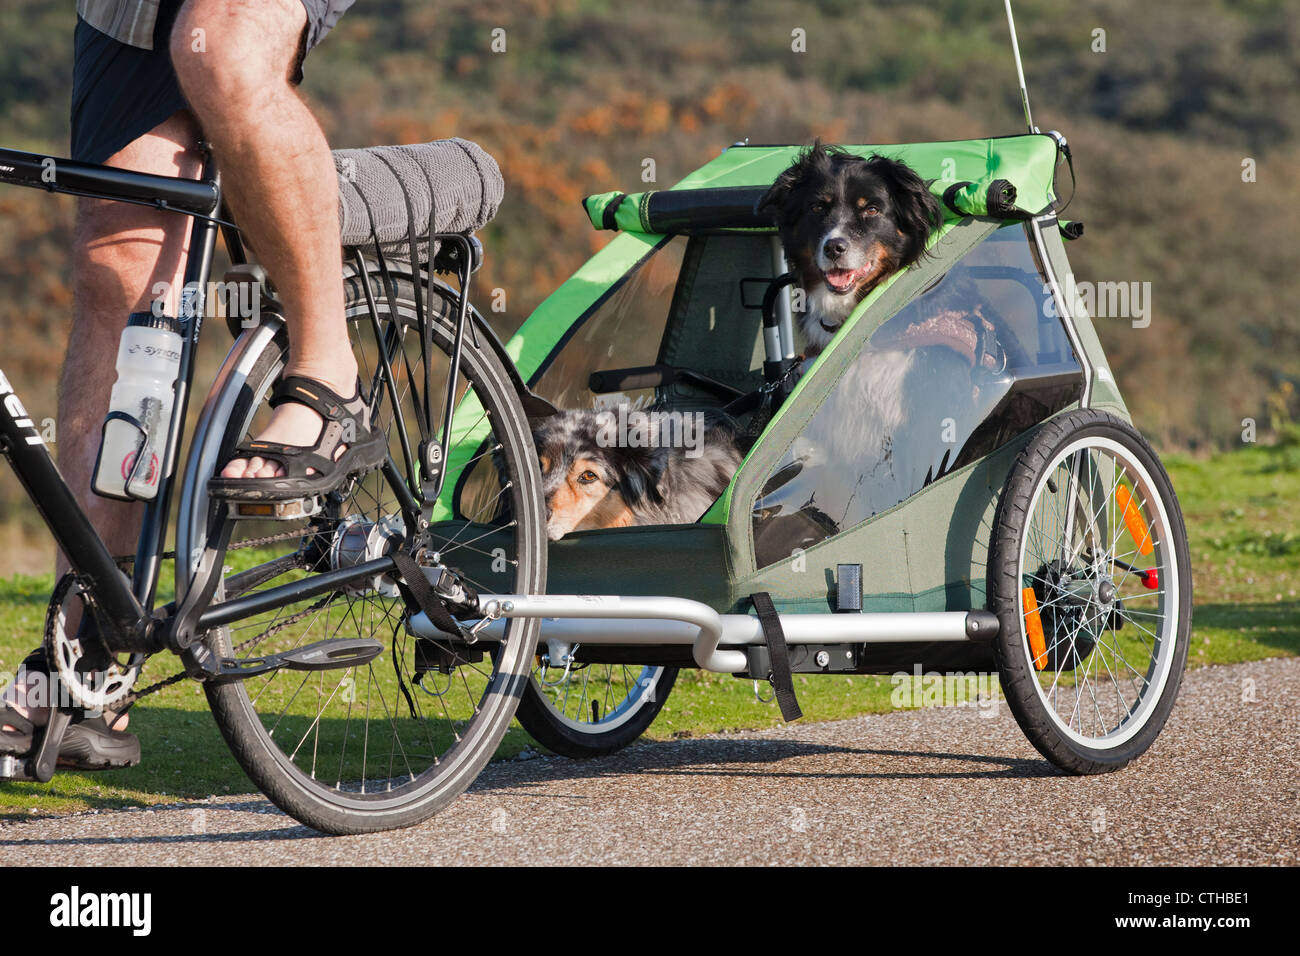 cycling buggy